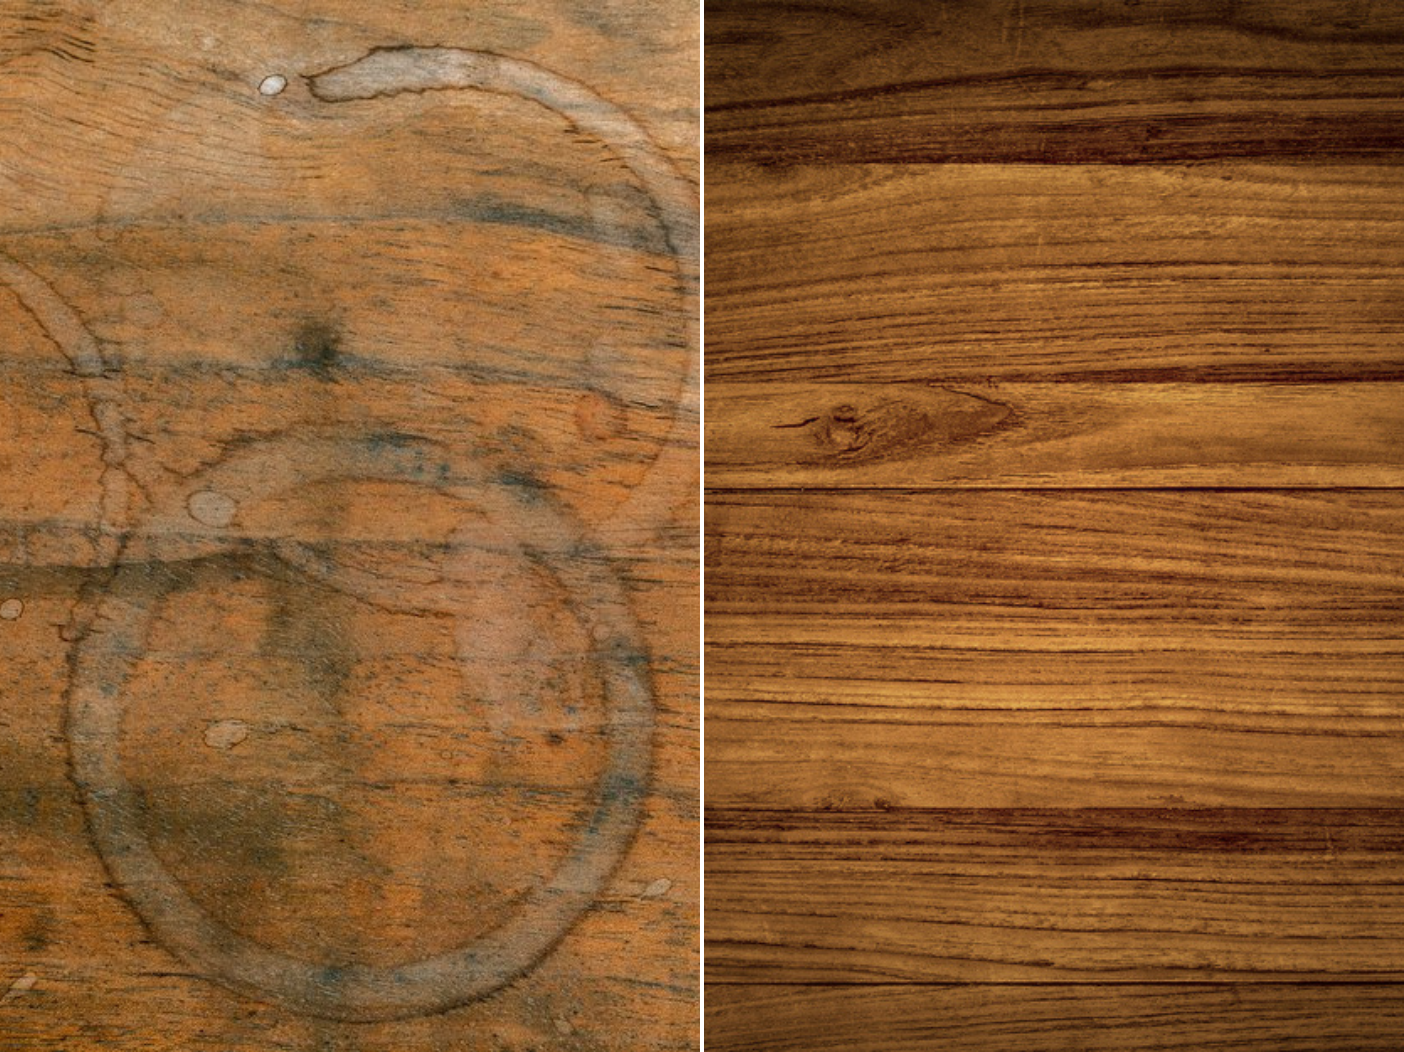 Side by side images of a damaged wood table and repaired wood table.